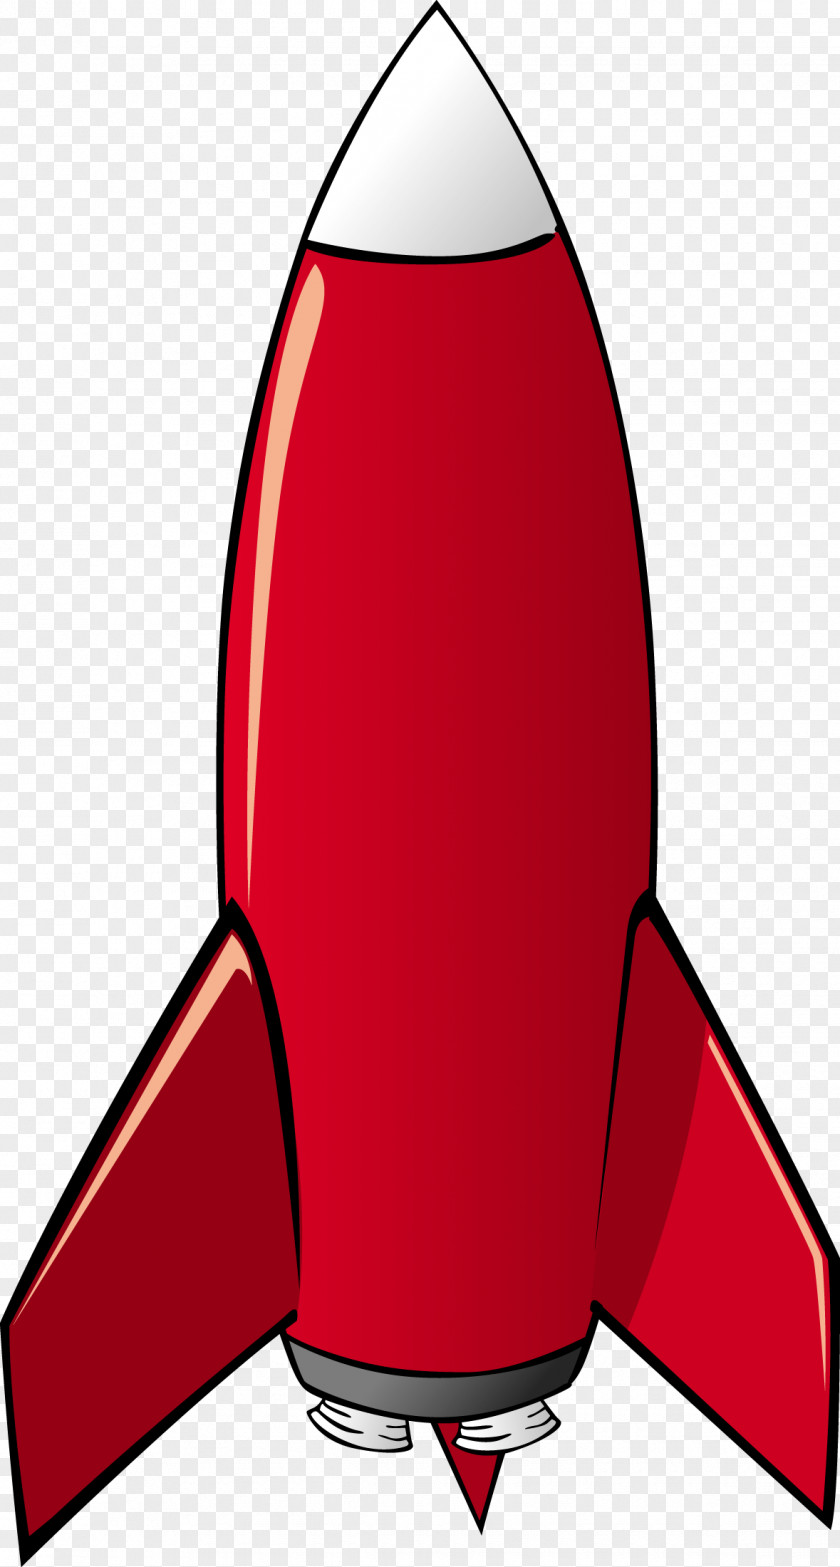 Astronaut Rocket Royalty-free PNG